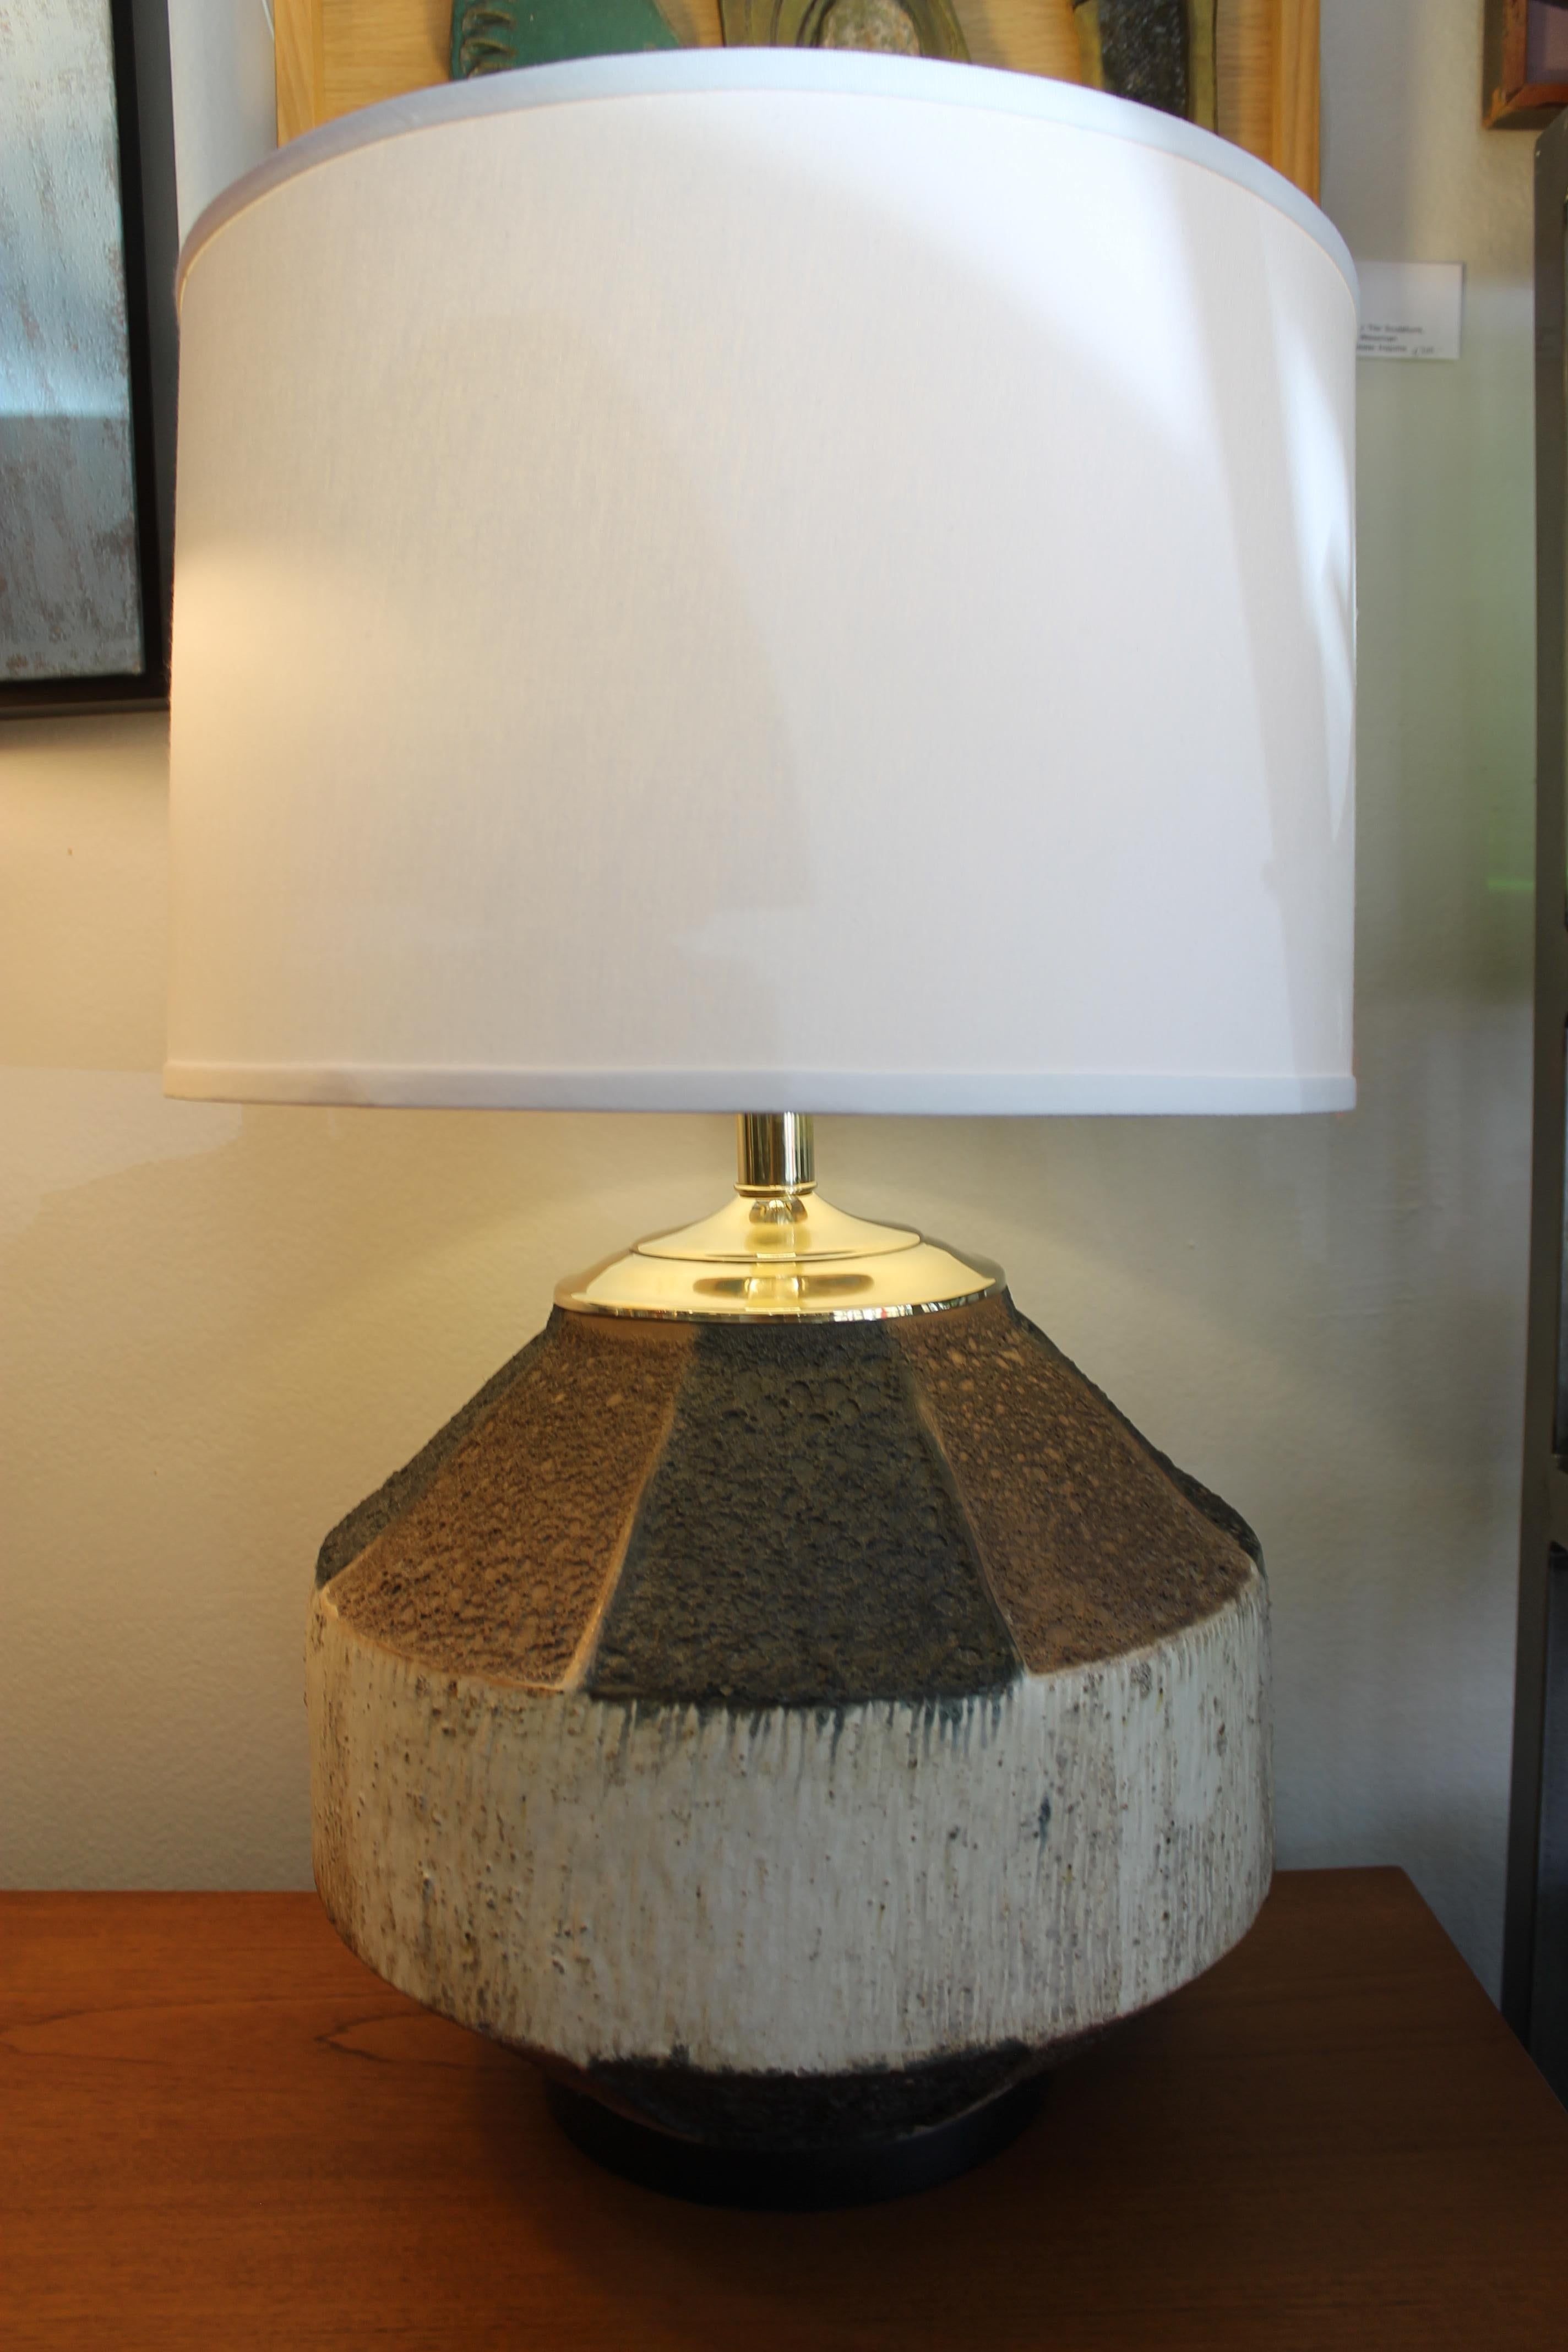 Circular ceramic lamp with octagon lava pattern on top of circular middle portion. Lamp has been professionally rewired for 3-way light bulb. New brass neck and hardware. Lamp measures 19.5